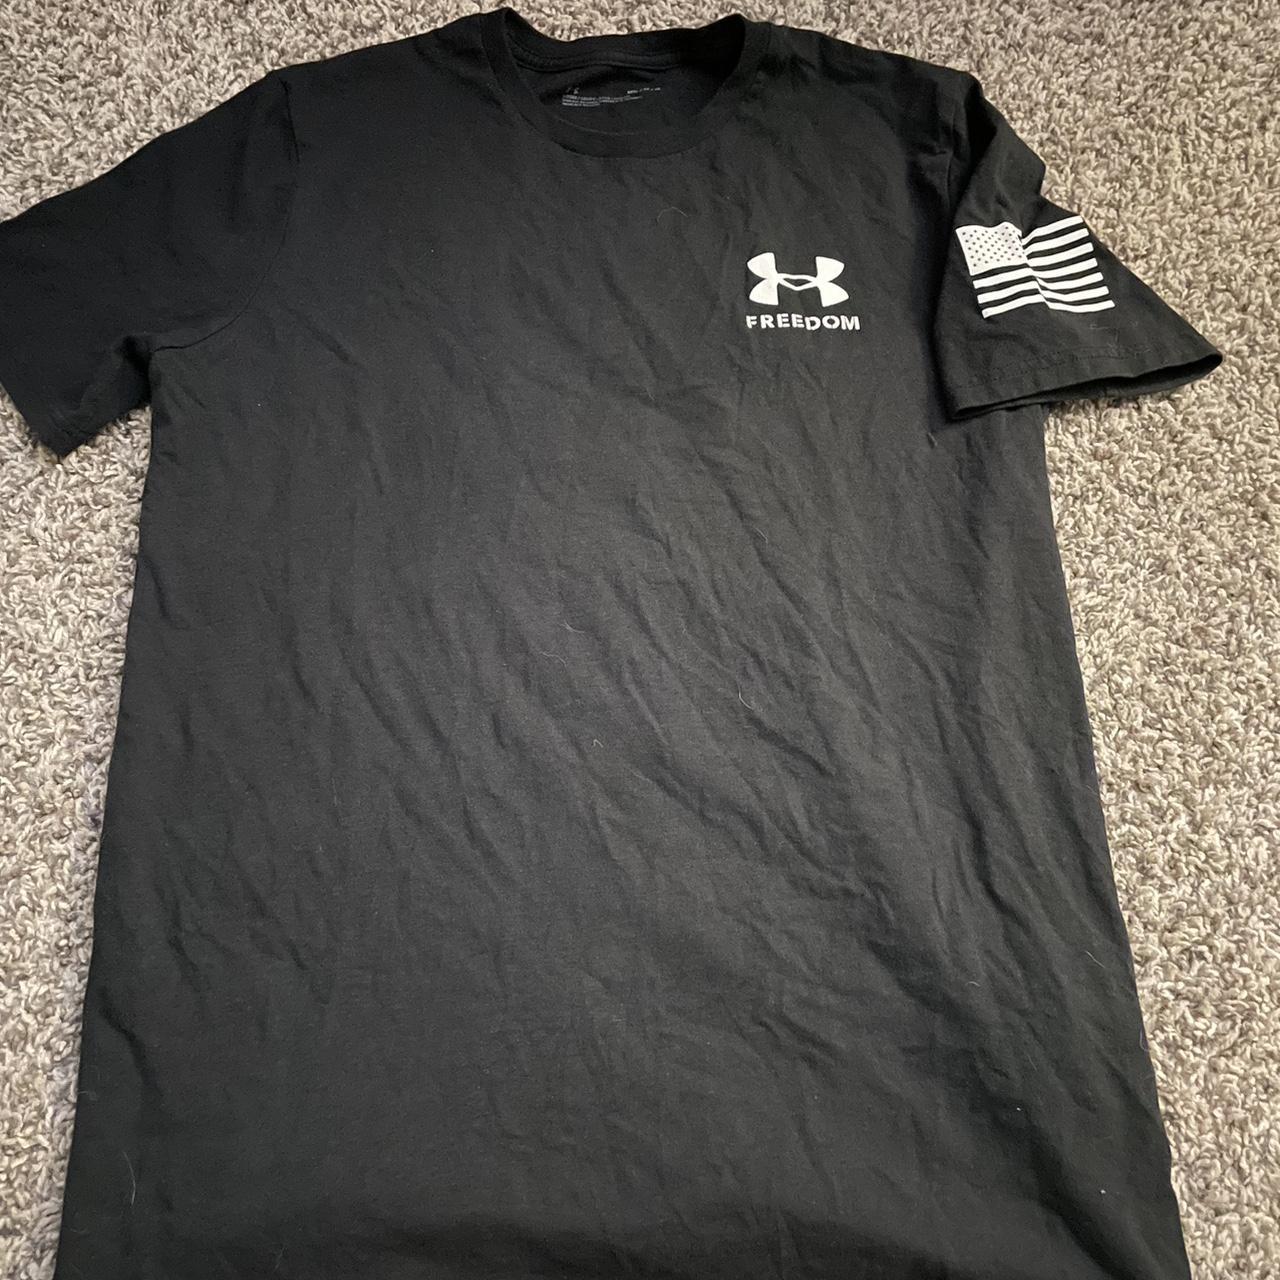 Under Armour Men's Black and White T-shirt